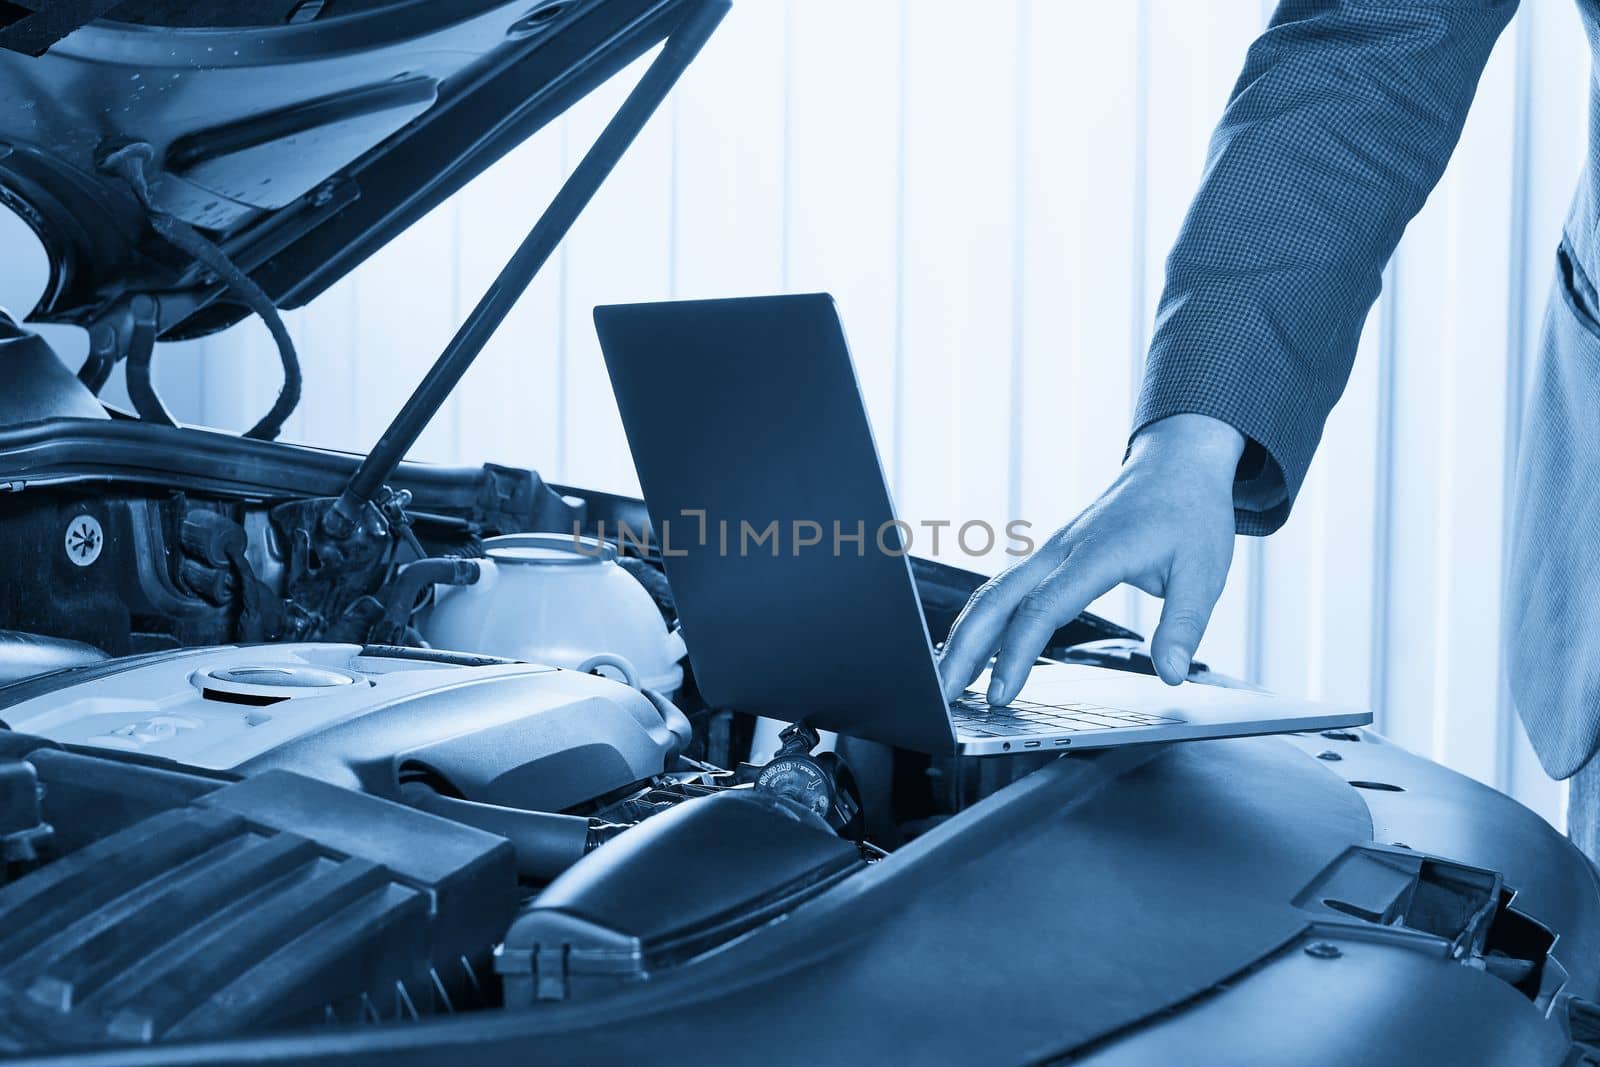 Services car engine machine concept, Automobile mechanic repairman checking a car engine with using computer diagnostics while repairing, car service and maintenance.